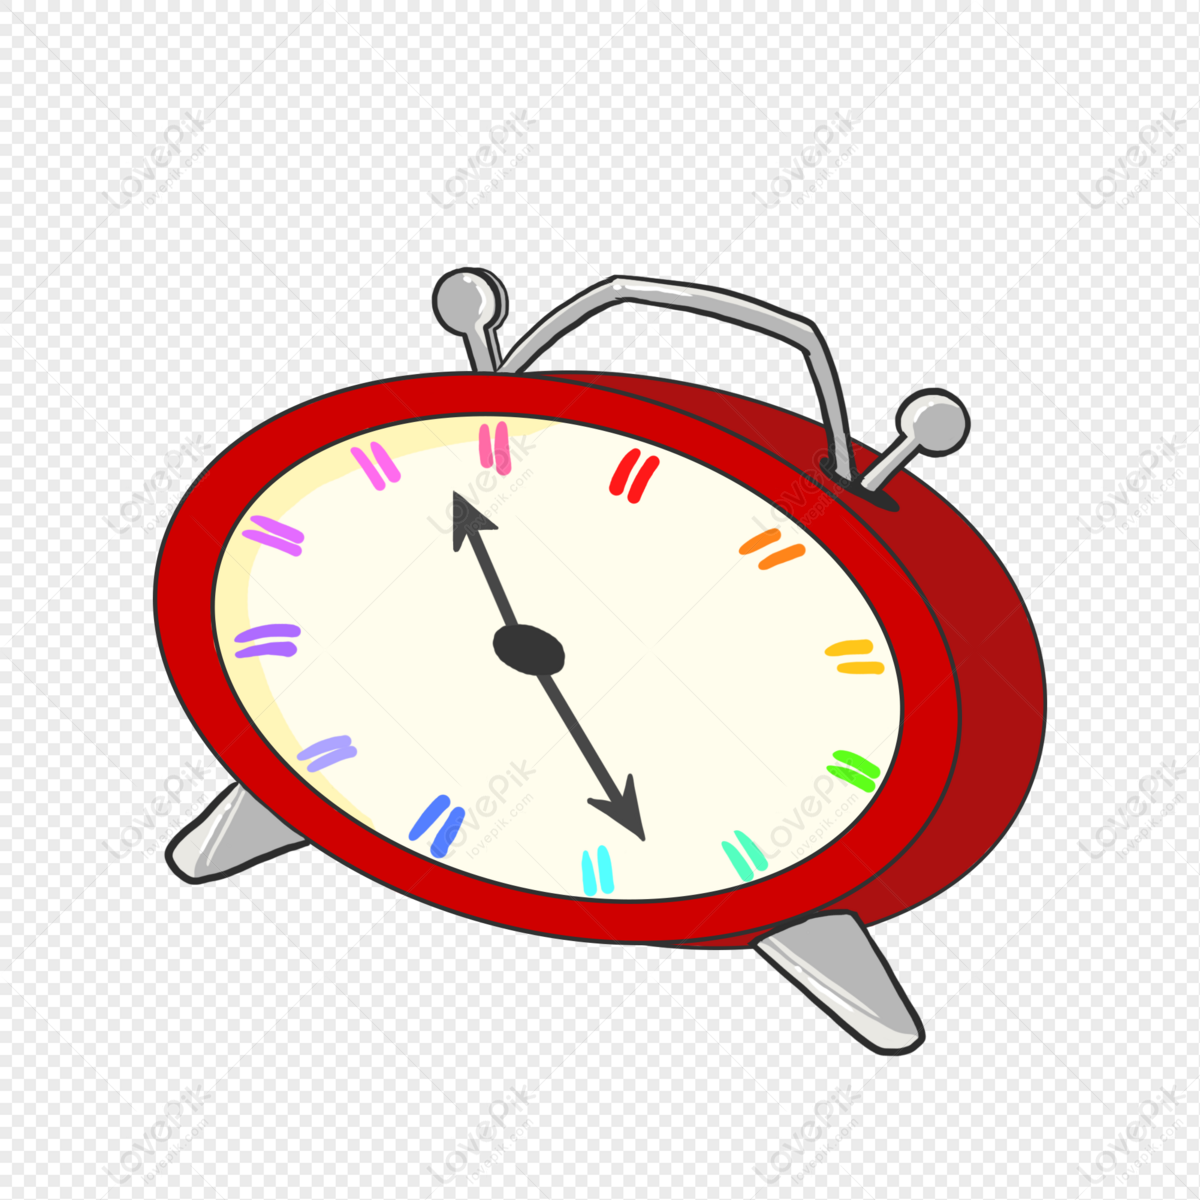 Senior High School Entrance Examination Cartoon Alarm Clock Png PNG  Transparent And Clipart Image For Free Download - Lovepik | 401227356